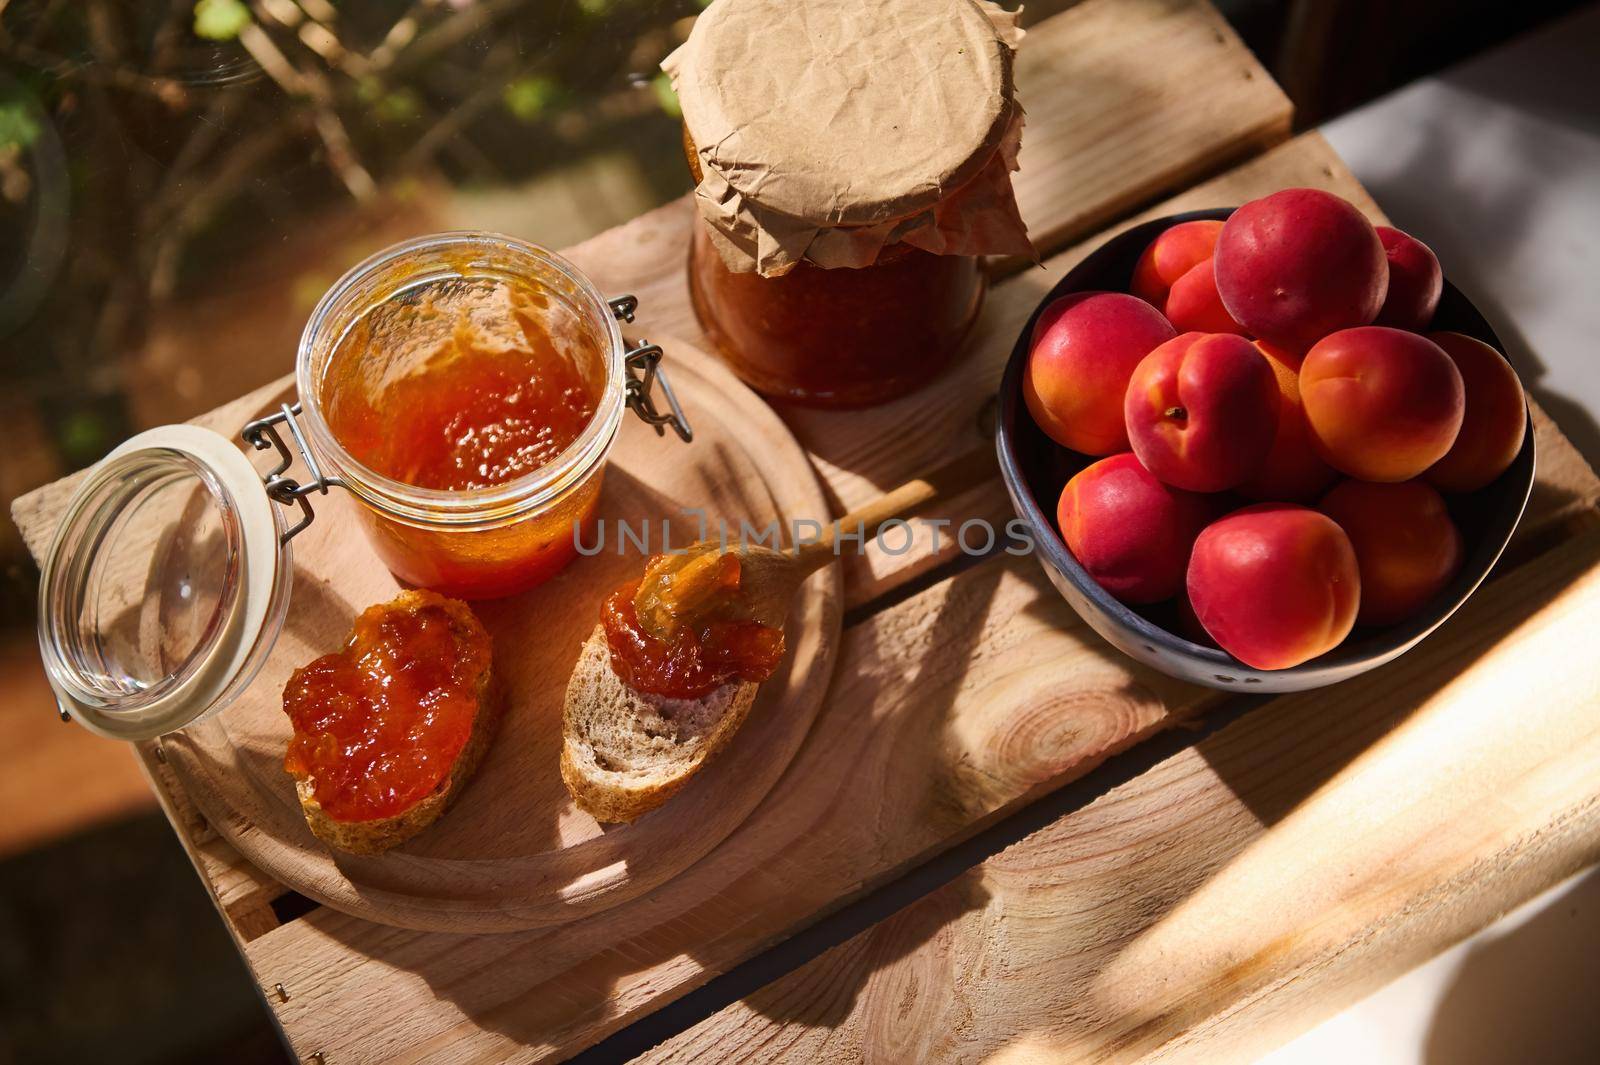 Top view of delicious ripe red apricots in a blue ceramic bowl on a wooden table with a glass jar of homemade apricot confiture and slices of freshly baked whole grain bread. Rustic style. Still life